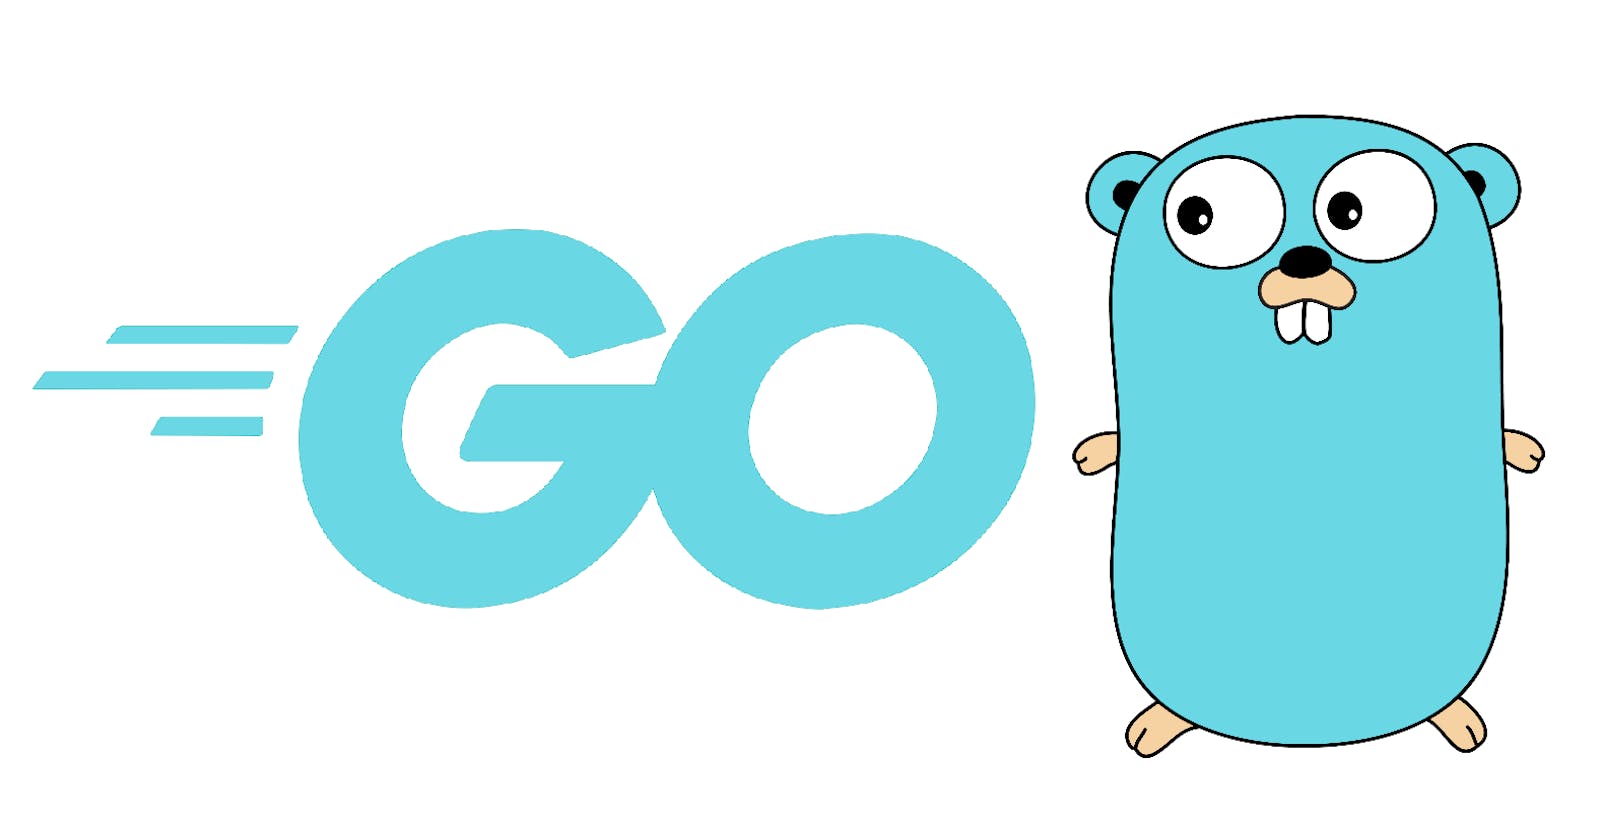 Go - Conditionals and Loops